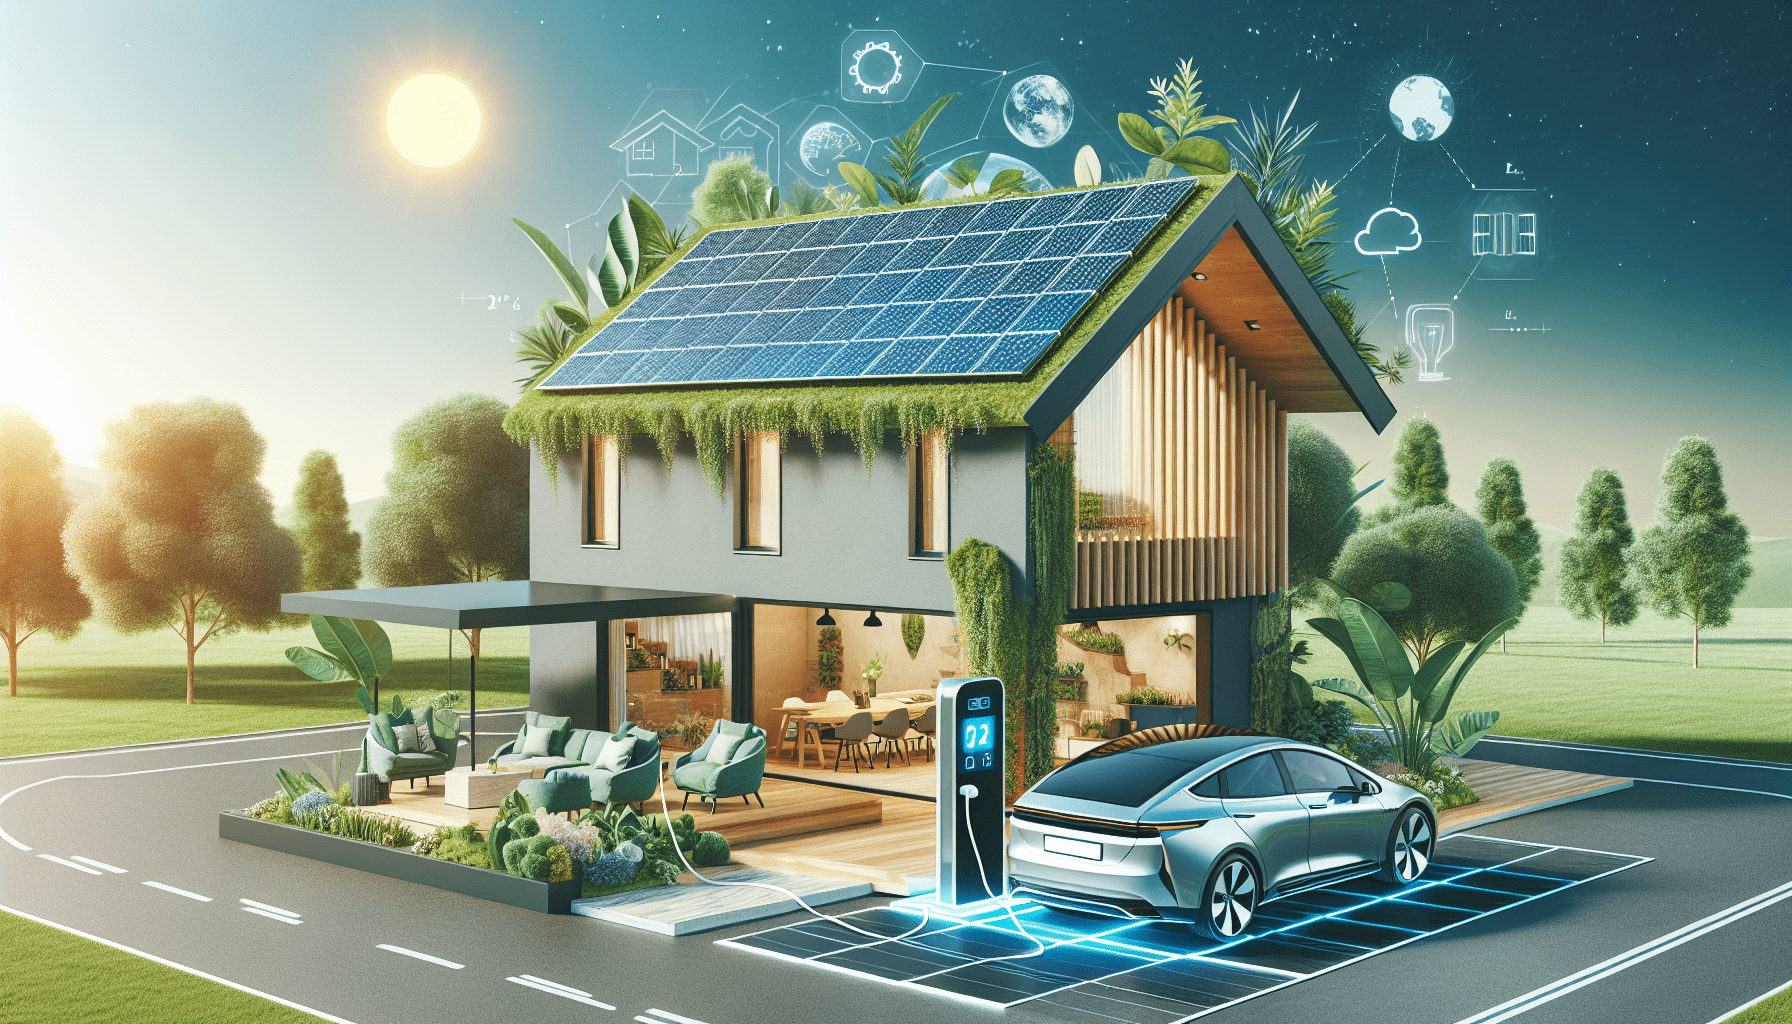 How Can I Switch To Green Energy At Home?